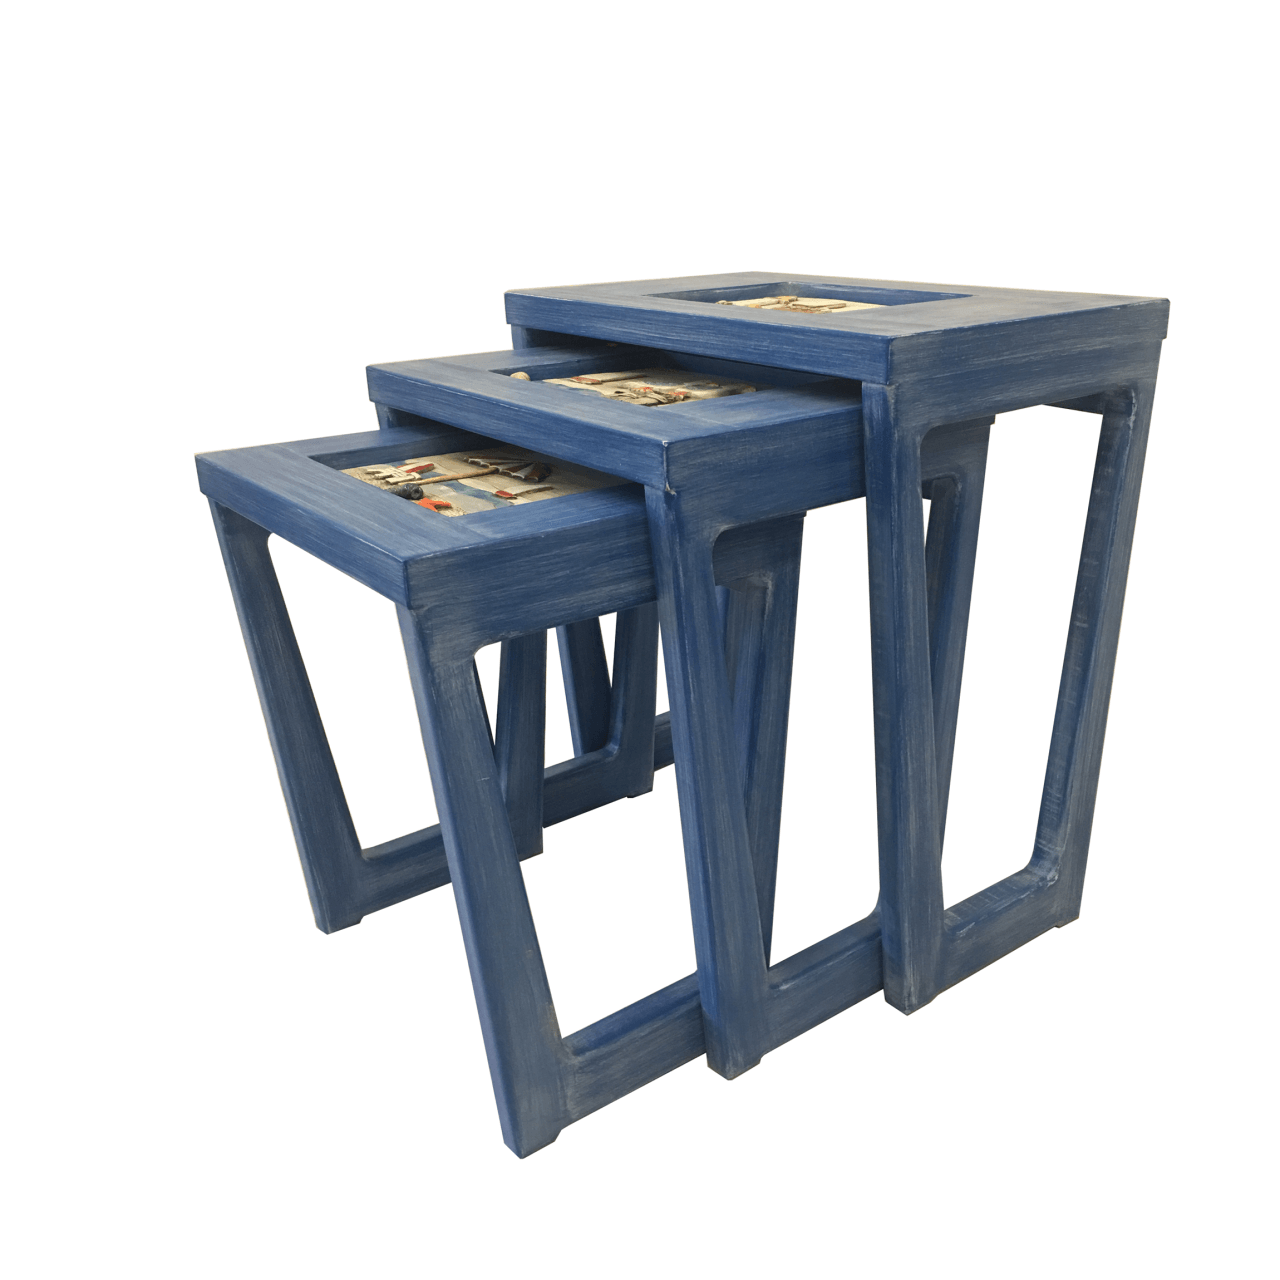 Blue Nesting Table is 100% handmade. Limited Edition